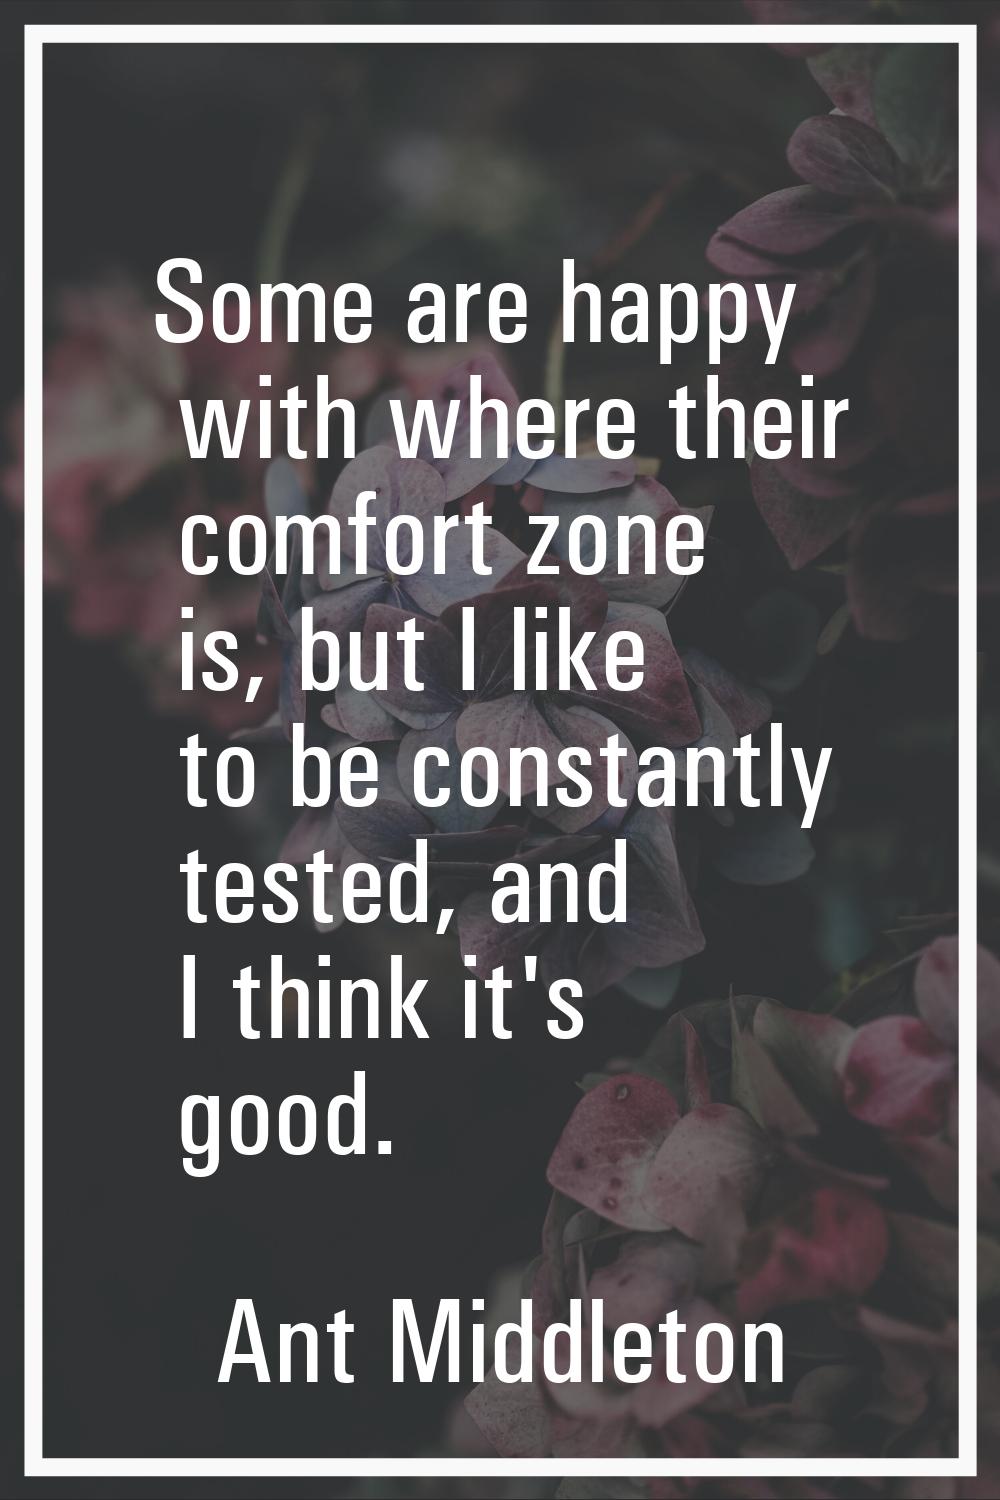 Some are happy with where their comfort zone is, but I like to be constantly tested, and I think it